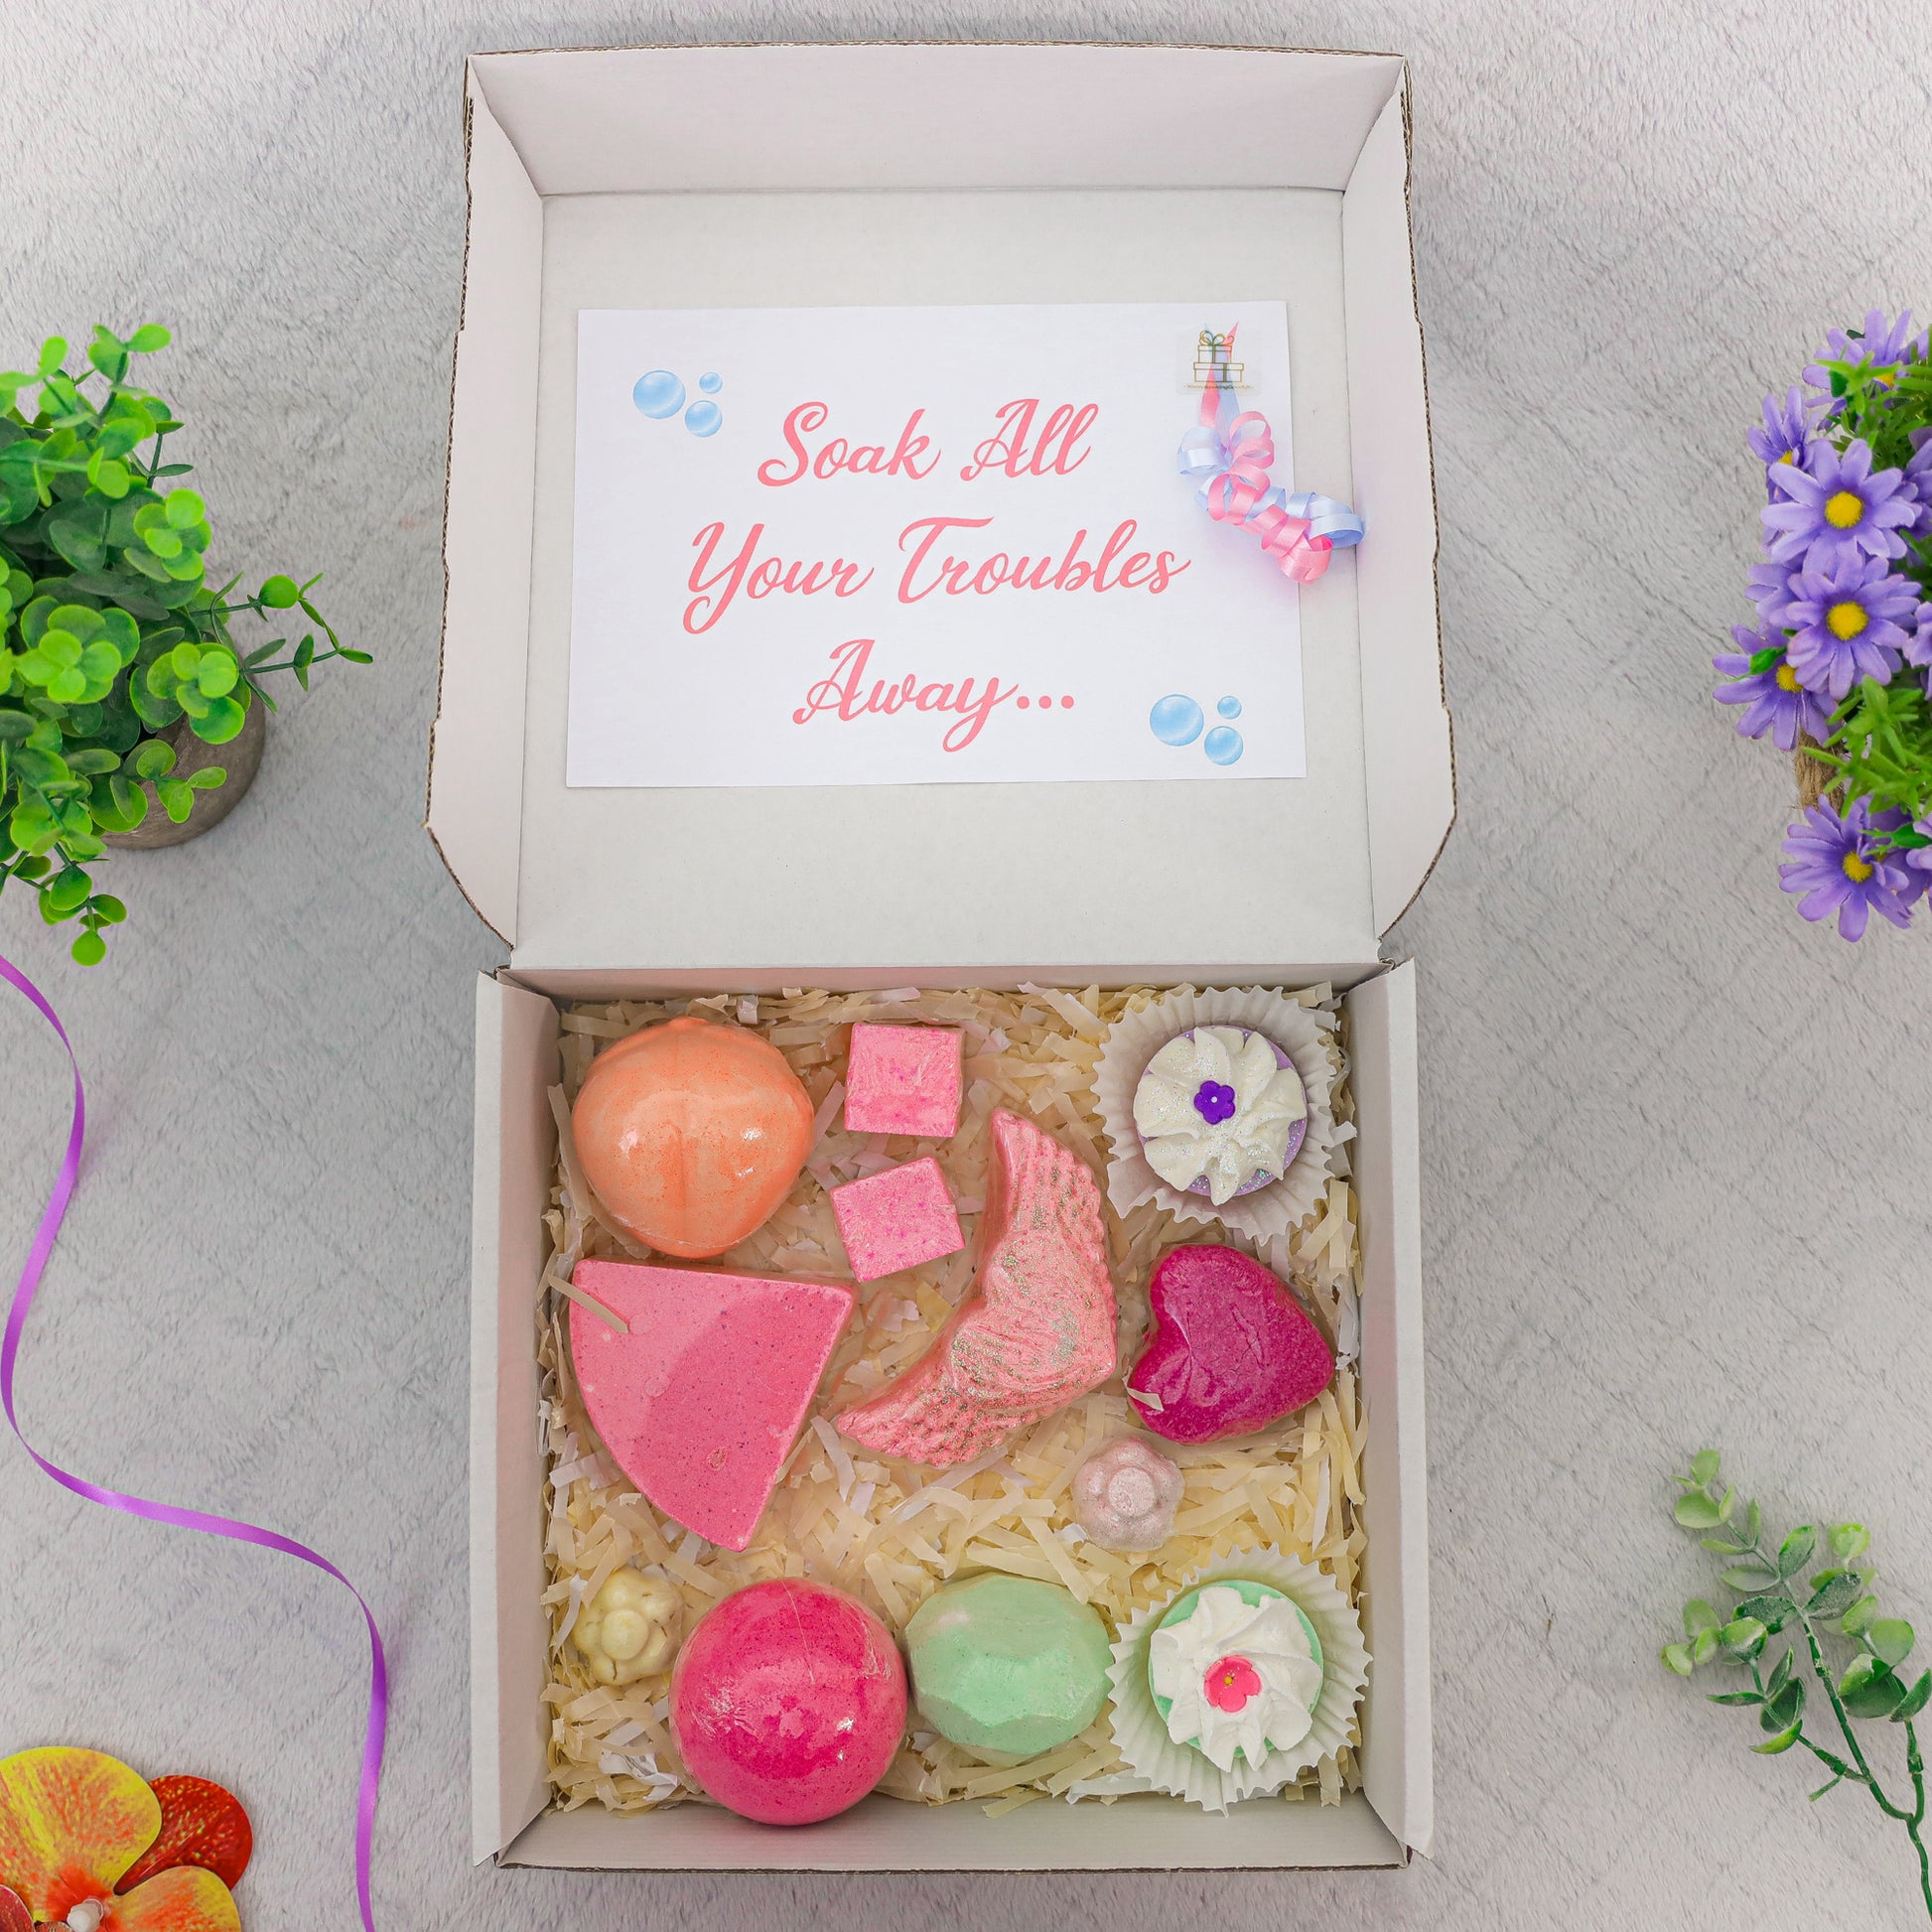 Large Bath Bomb Pamper Relax Gift Box  - Always Looking Good -   